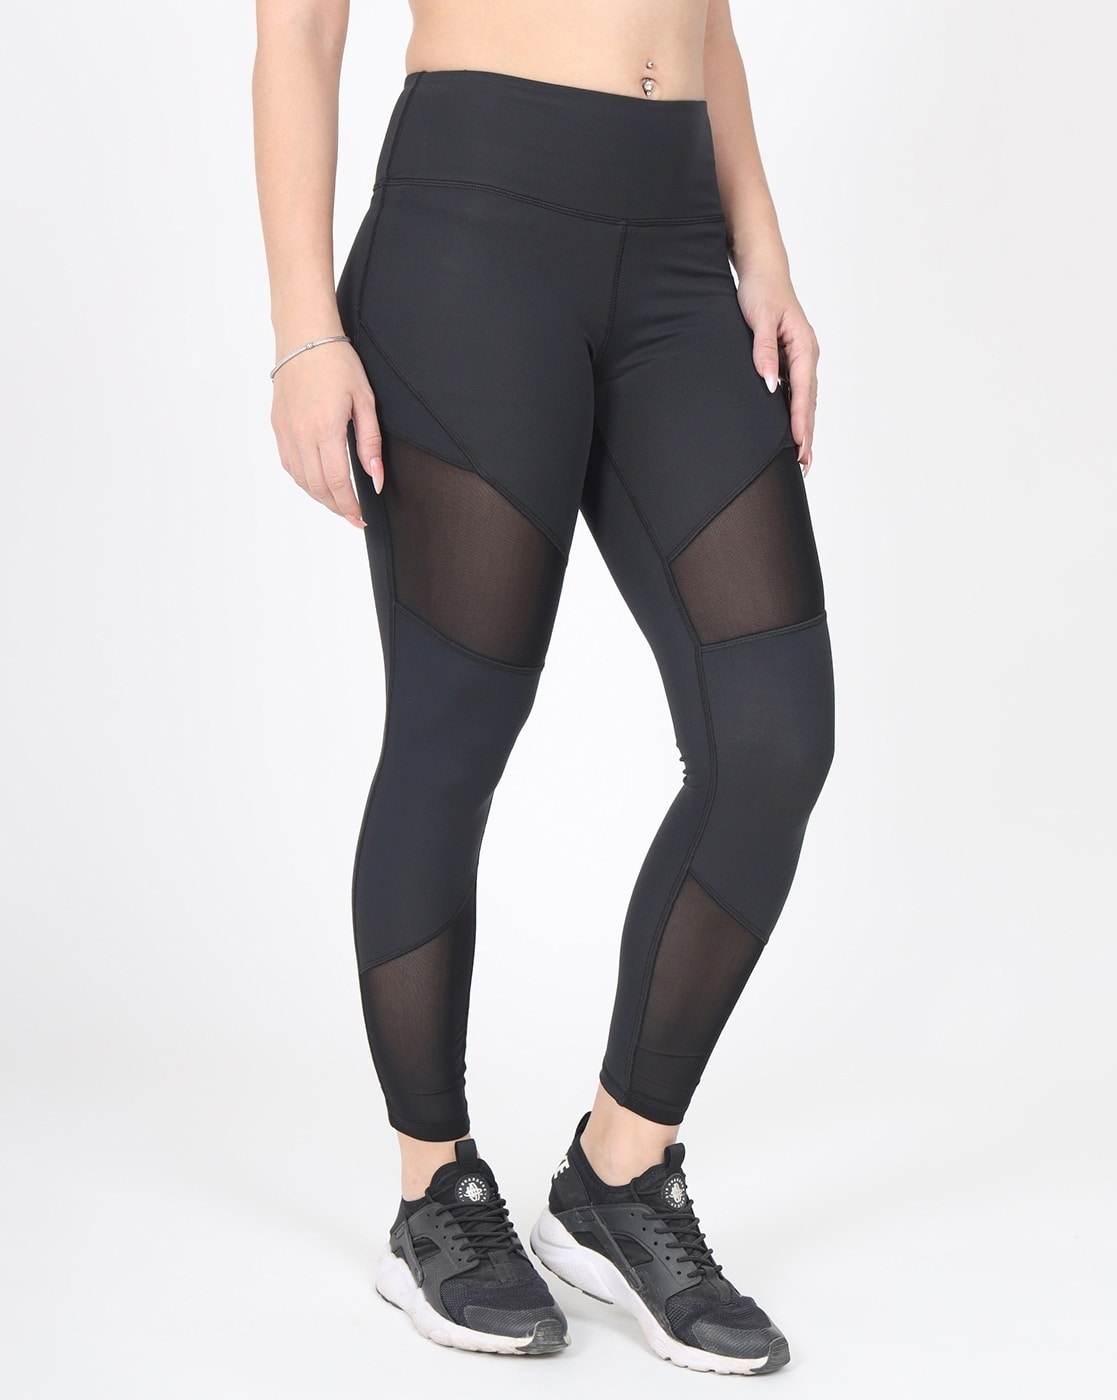 RGFT womens fitness leggings size M black stretch skinny solid spell out  040616